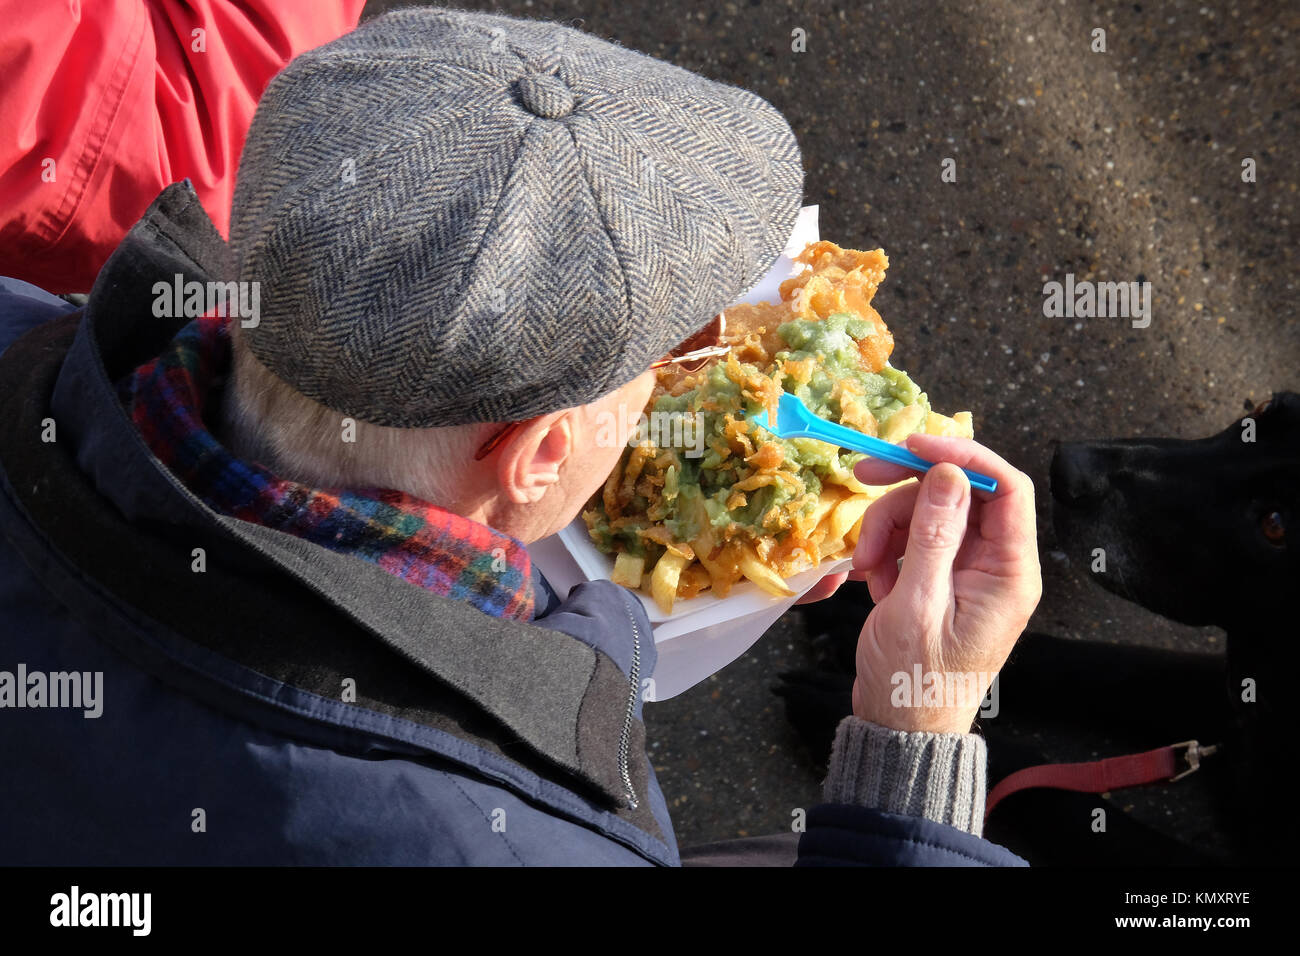 Man eating fast food outdoors. Fish, chips and peas. Stock Photo